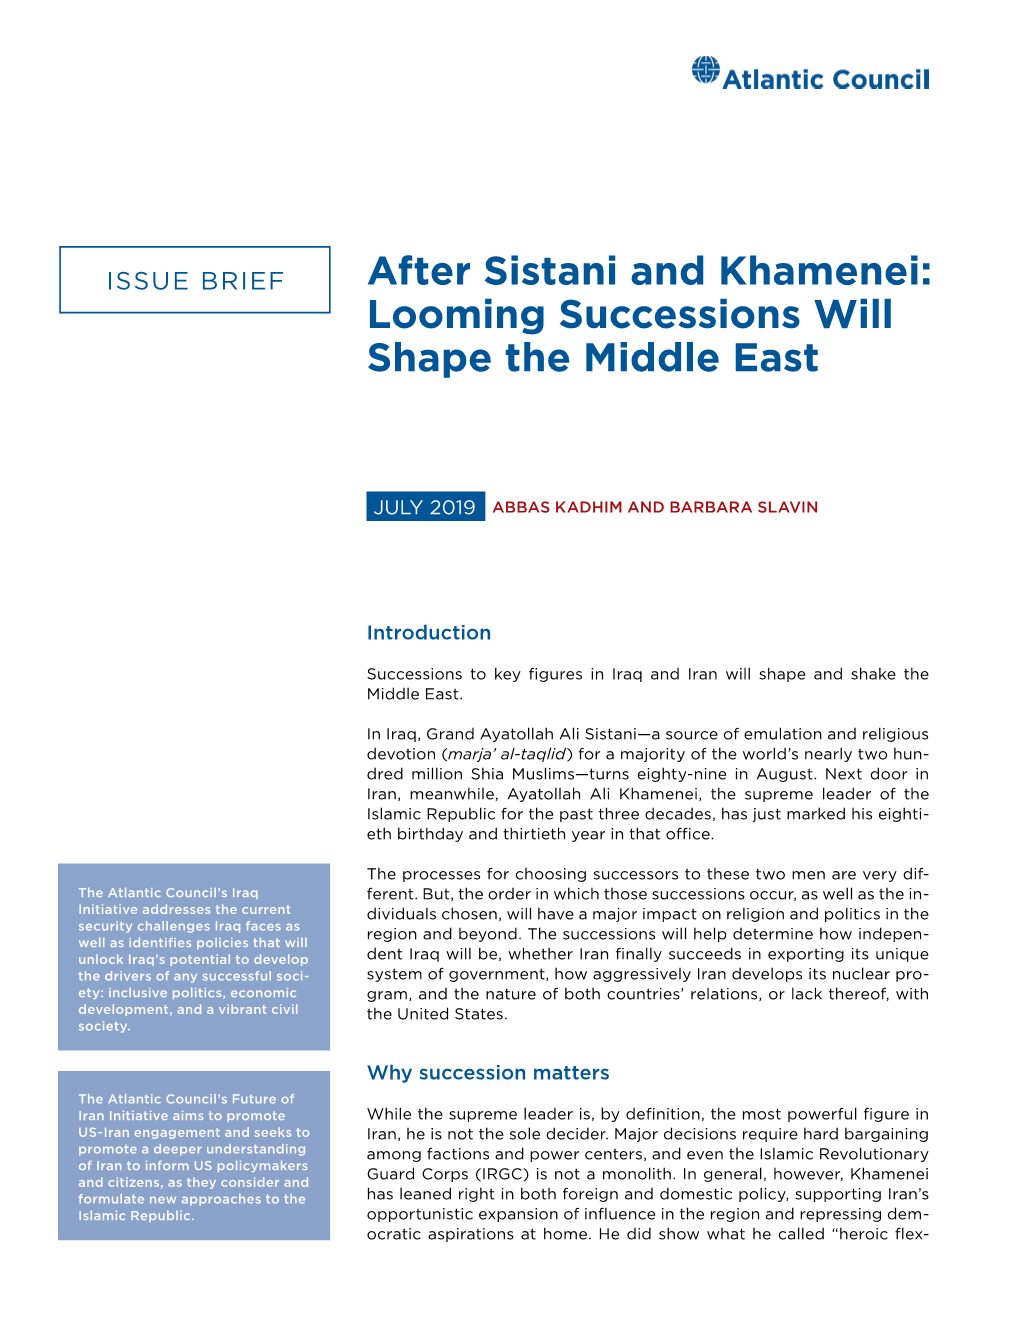 After Sistani and Khamenei: Looming Successions Will Shape the Middle East